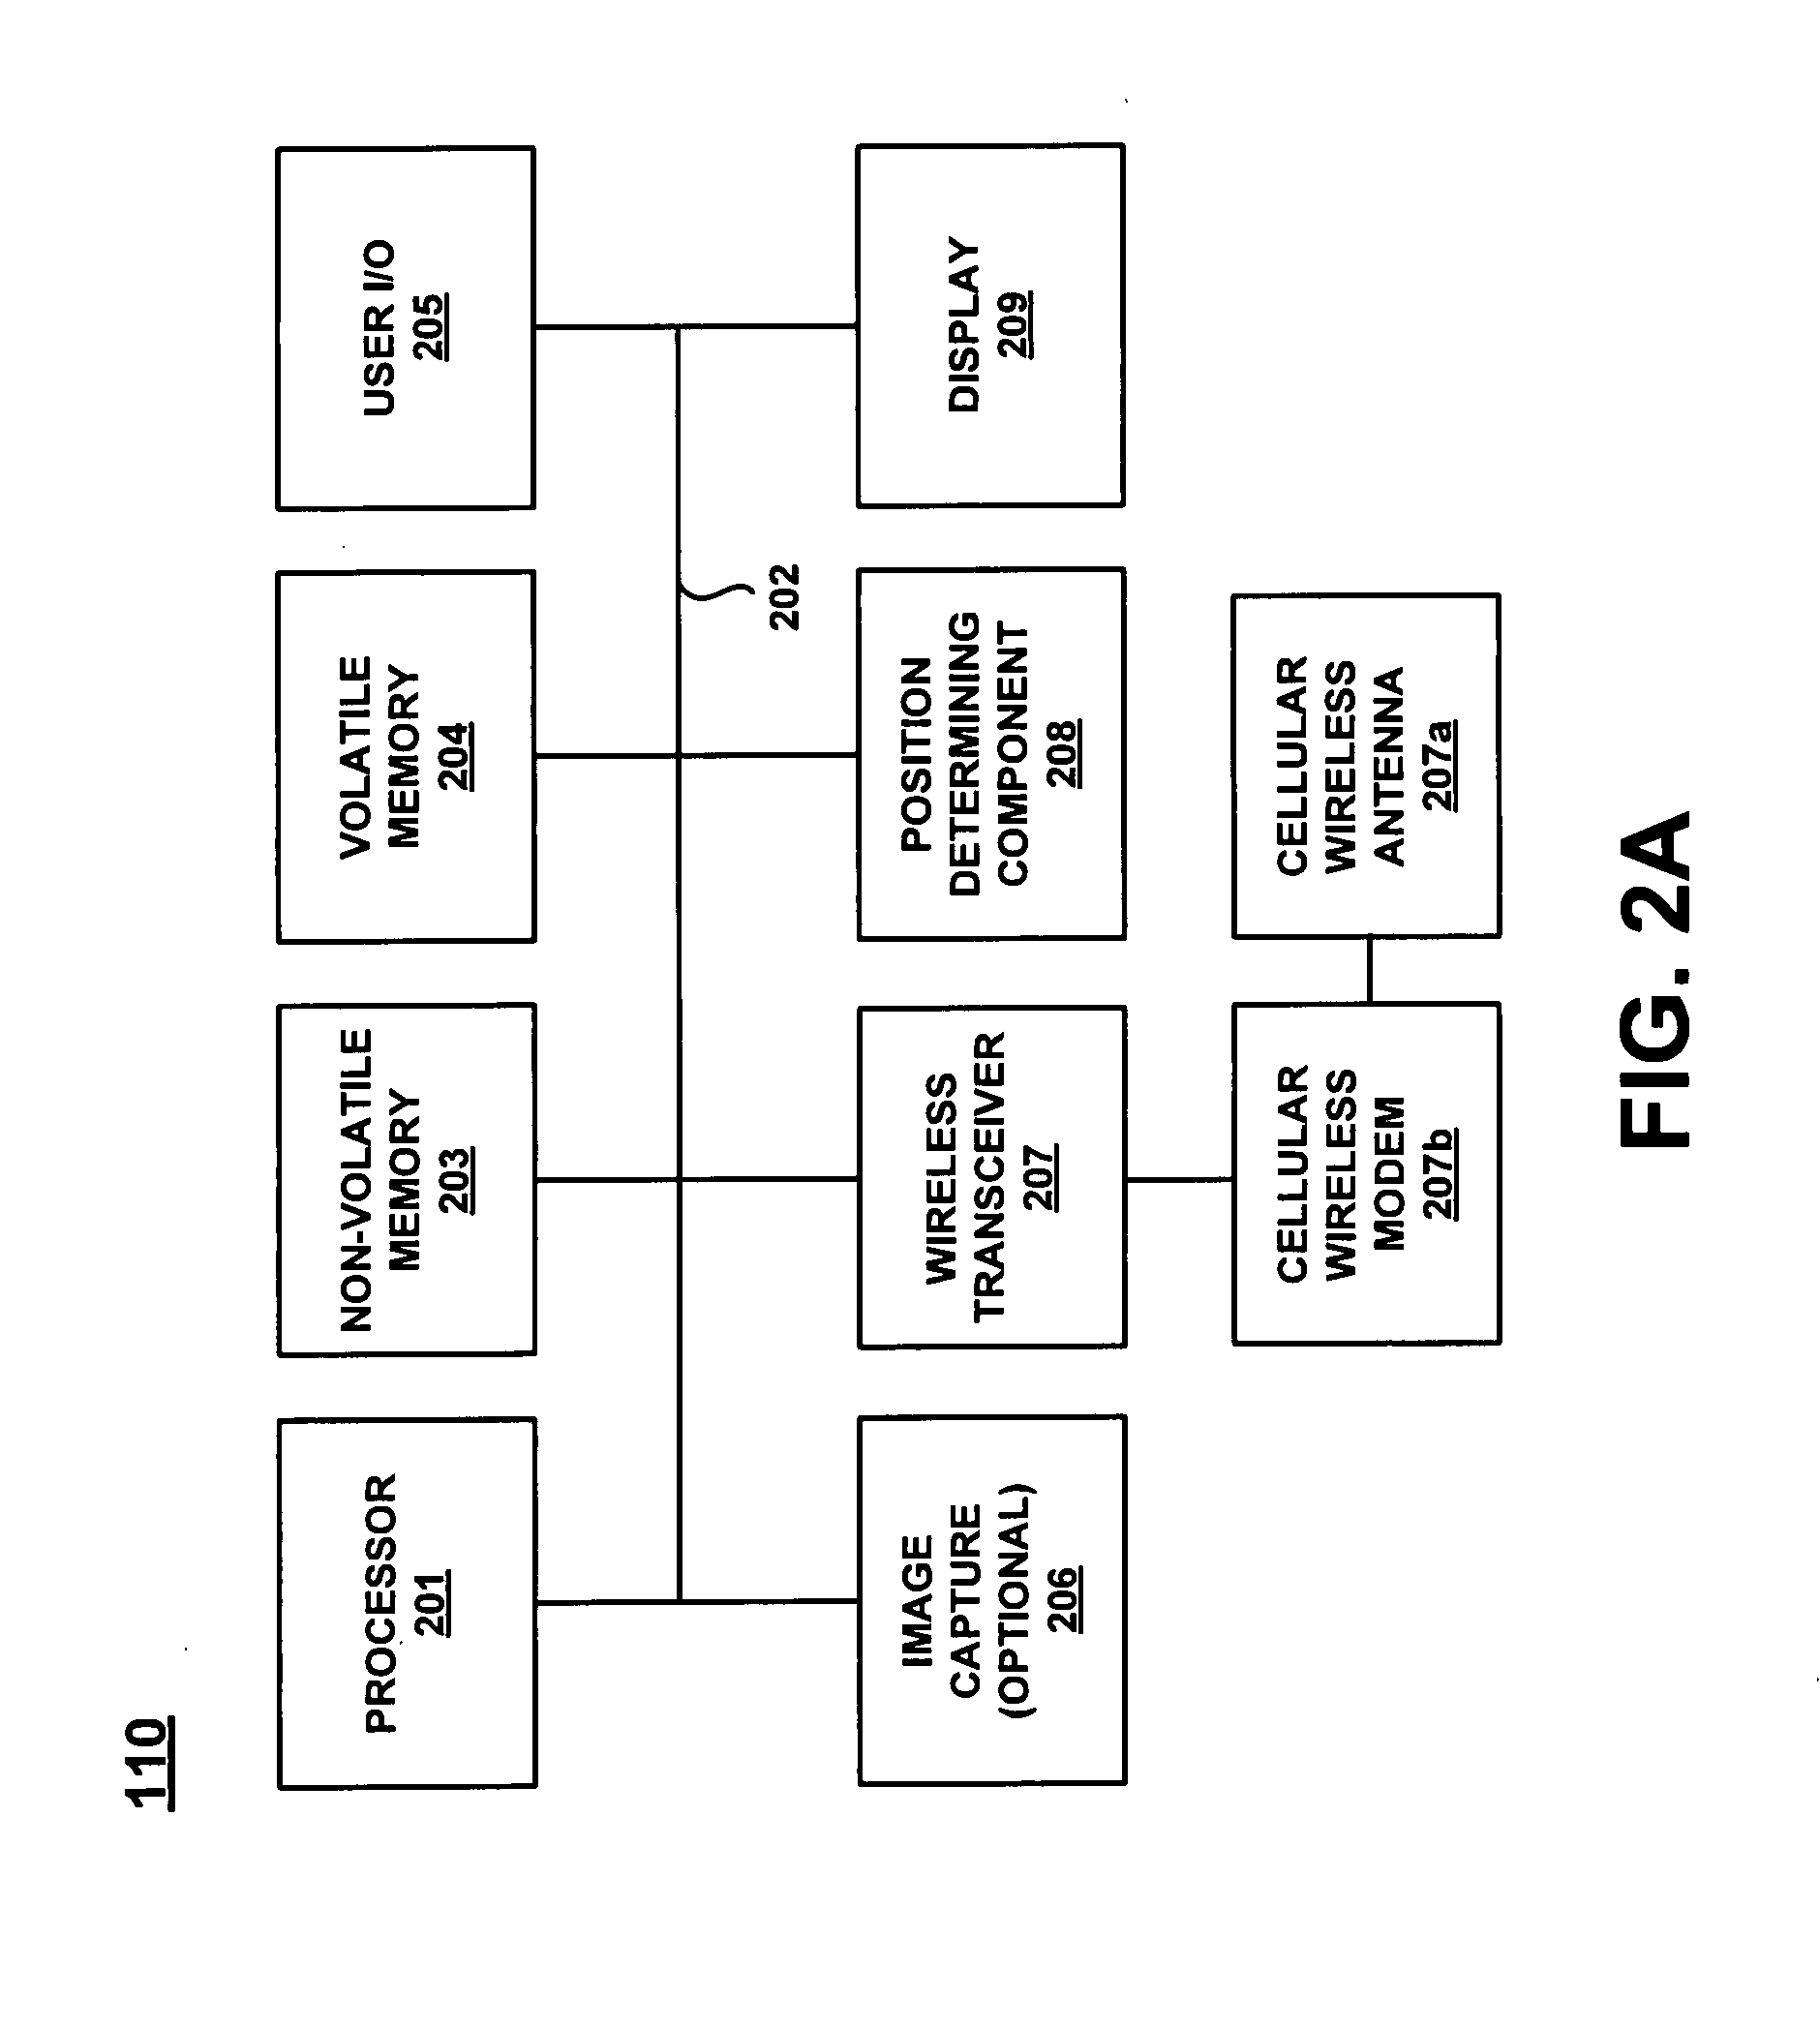 Method and system for implementing a GIS data collection network